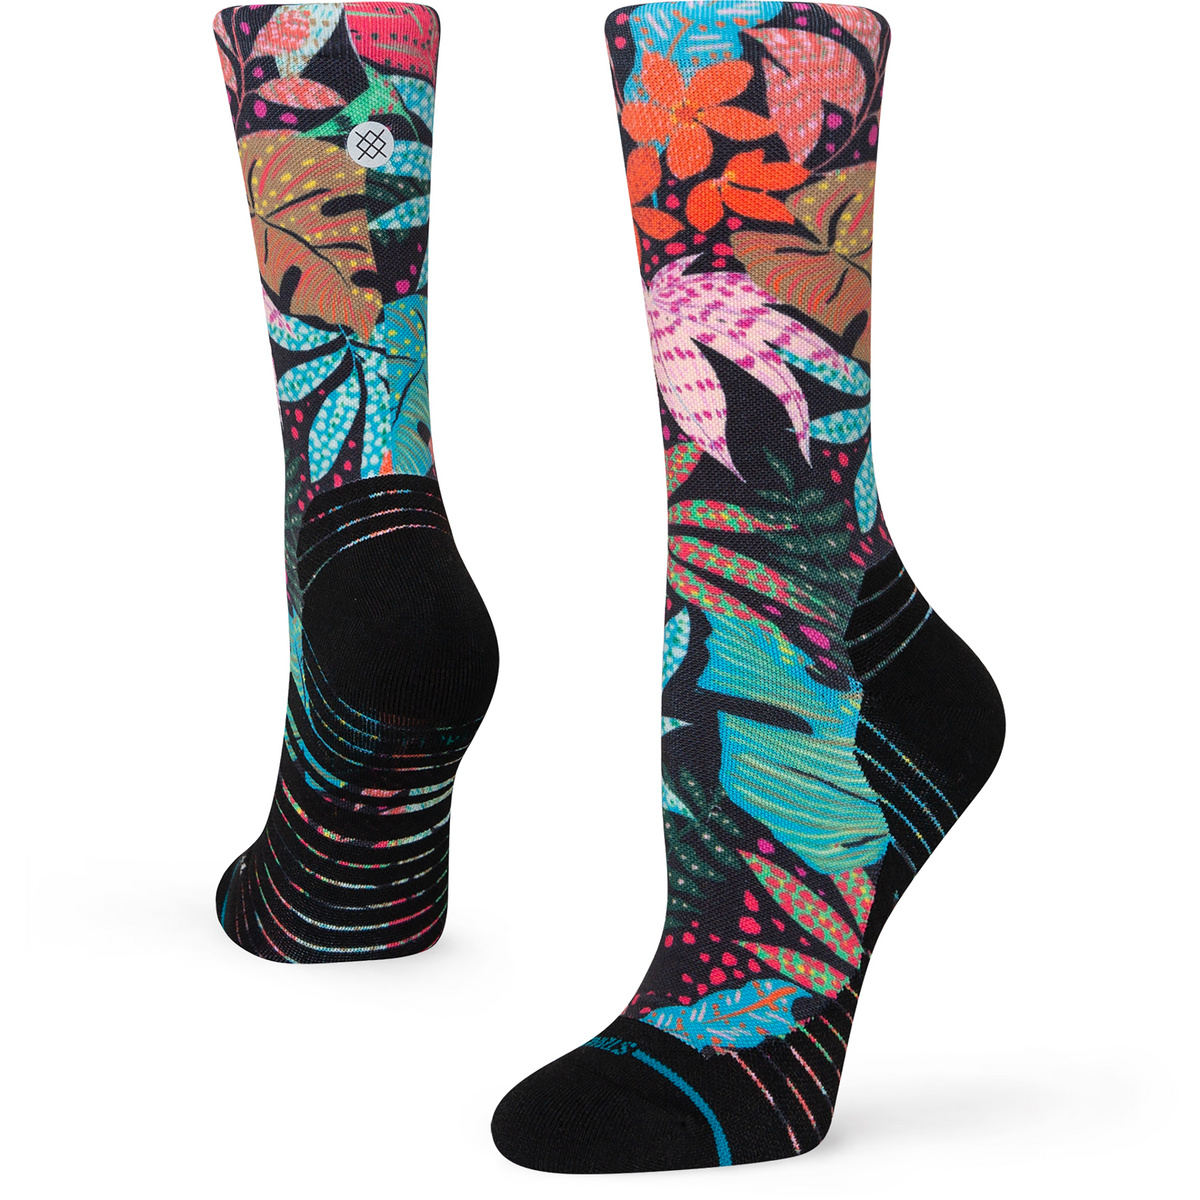 Image of Stance Donna Calze Trippy Trop Crew